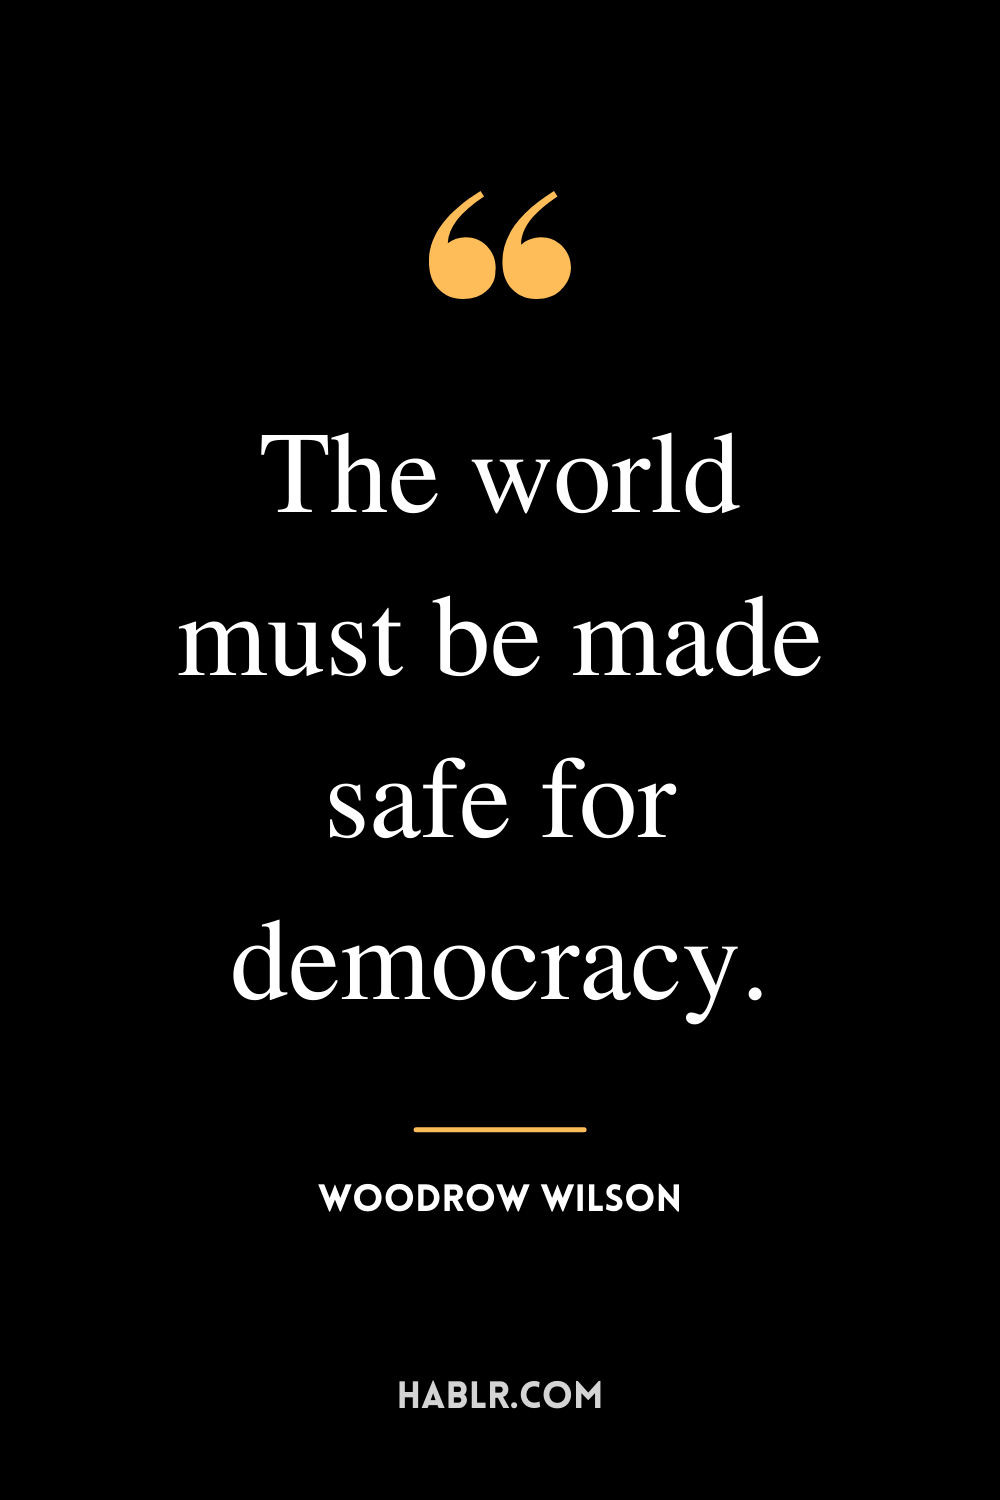 “The world must be made safe for democracy.” -Woodrow Wilson